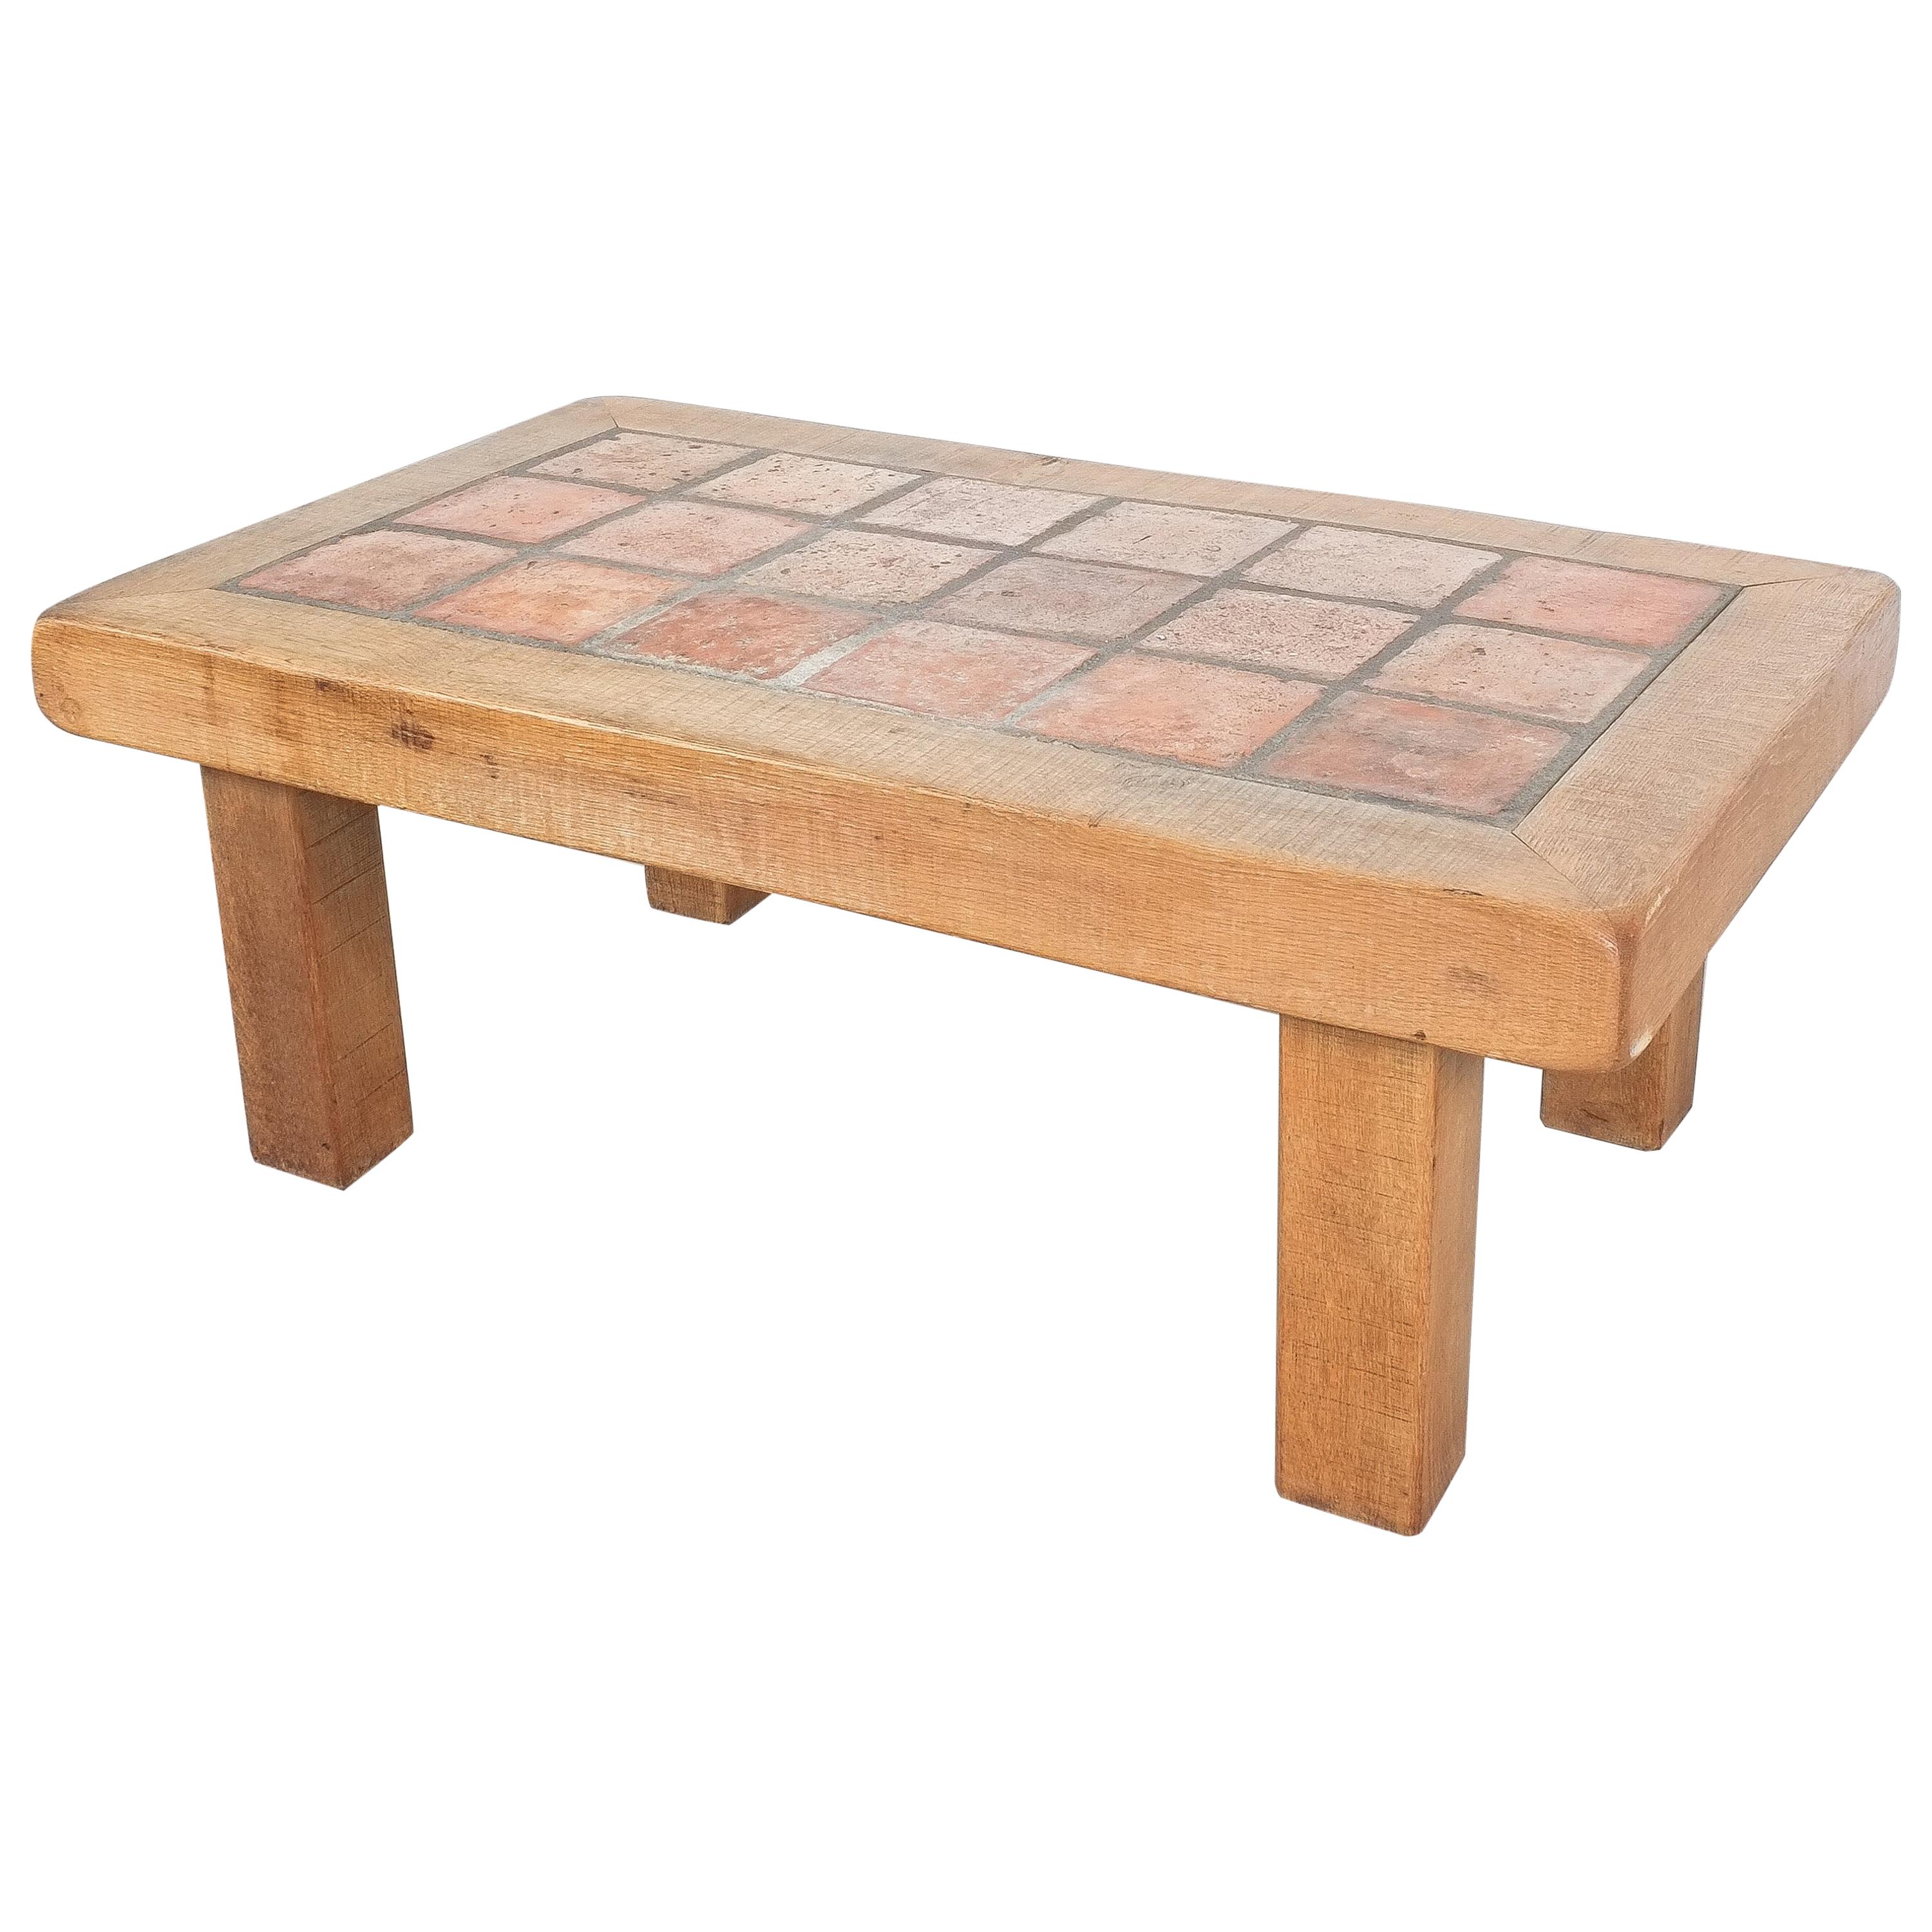 Large Artisan Oak Terracotta Coffee or Outdoor Table, France, 1950